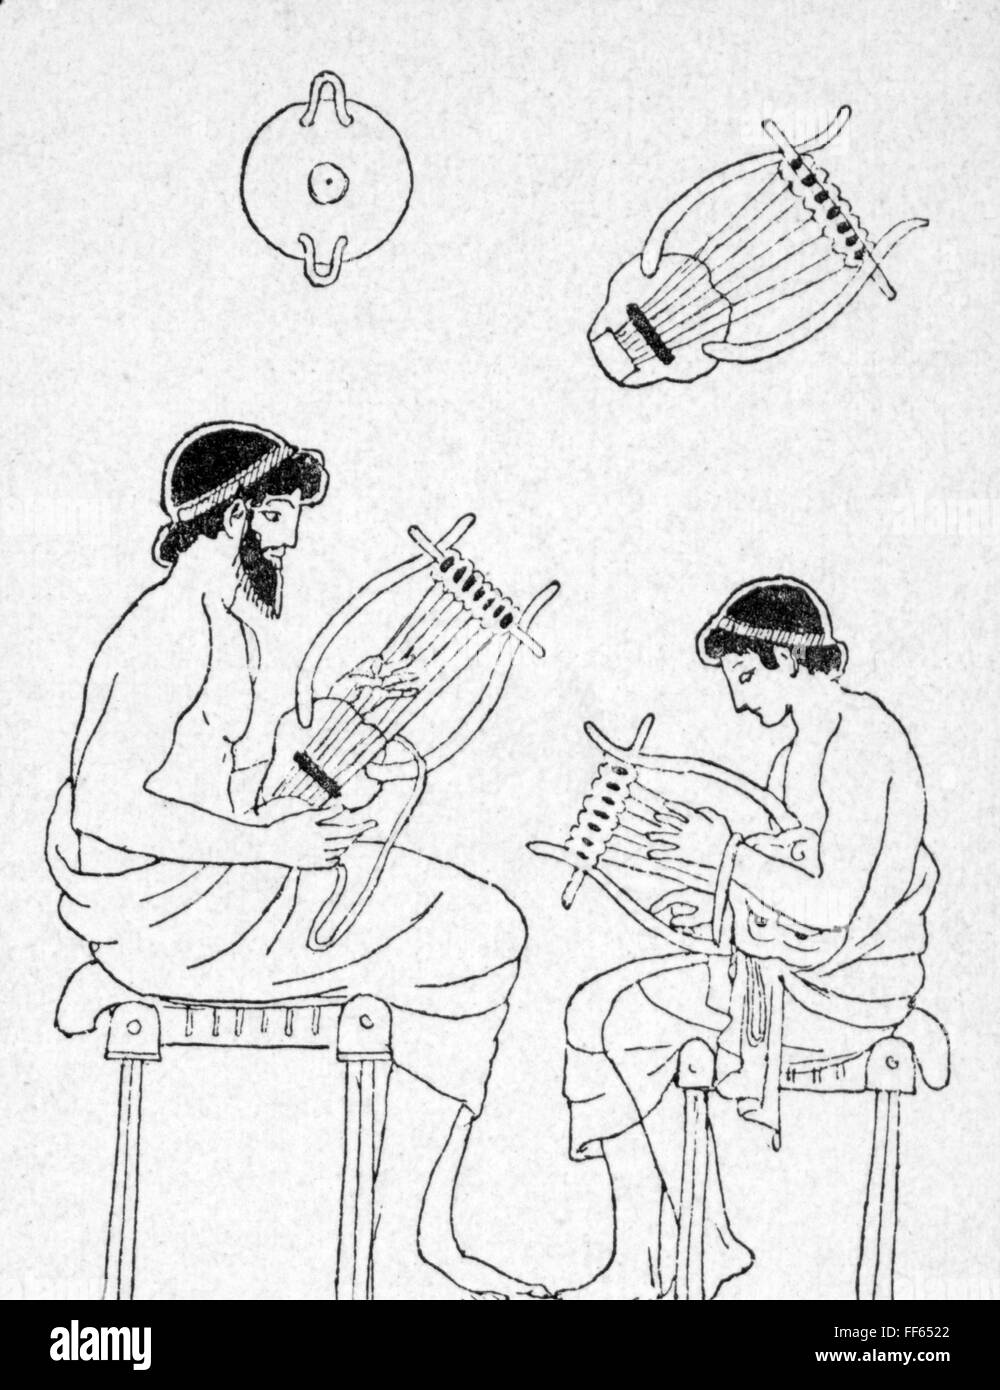 music,musicians,music lessons,teacher and pupil with lyra,Greek vase painting,circa 5th century BC,wood engraving,19th century,lesson,lessons,schooling,schoolings,school,schools,pedagogy,paedagogy,education,musical instrument,musical instruments,stringed instrument,string instrument,stringed instruments,string instruments,plucked instrument,plucked instruments,chordophone,make music,play music,making music,playing music,makes music,plays music,made music,played music,playing,play,furniture,stool,stools,Greece,Greeks,anci,Additional-Rights-Clearences-Not Available Stock Photo